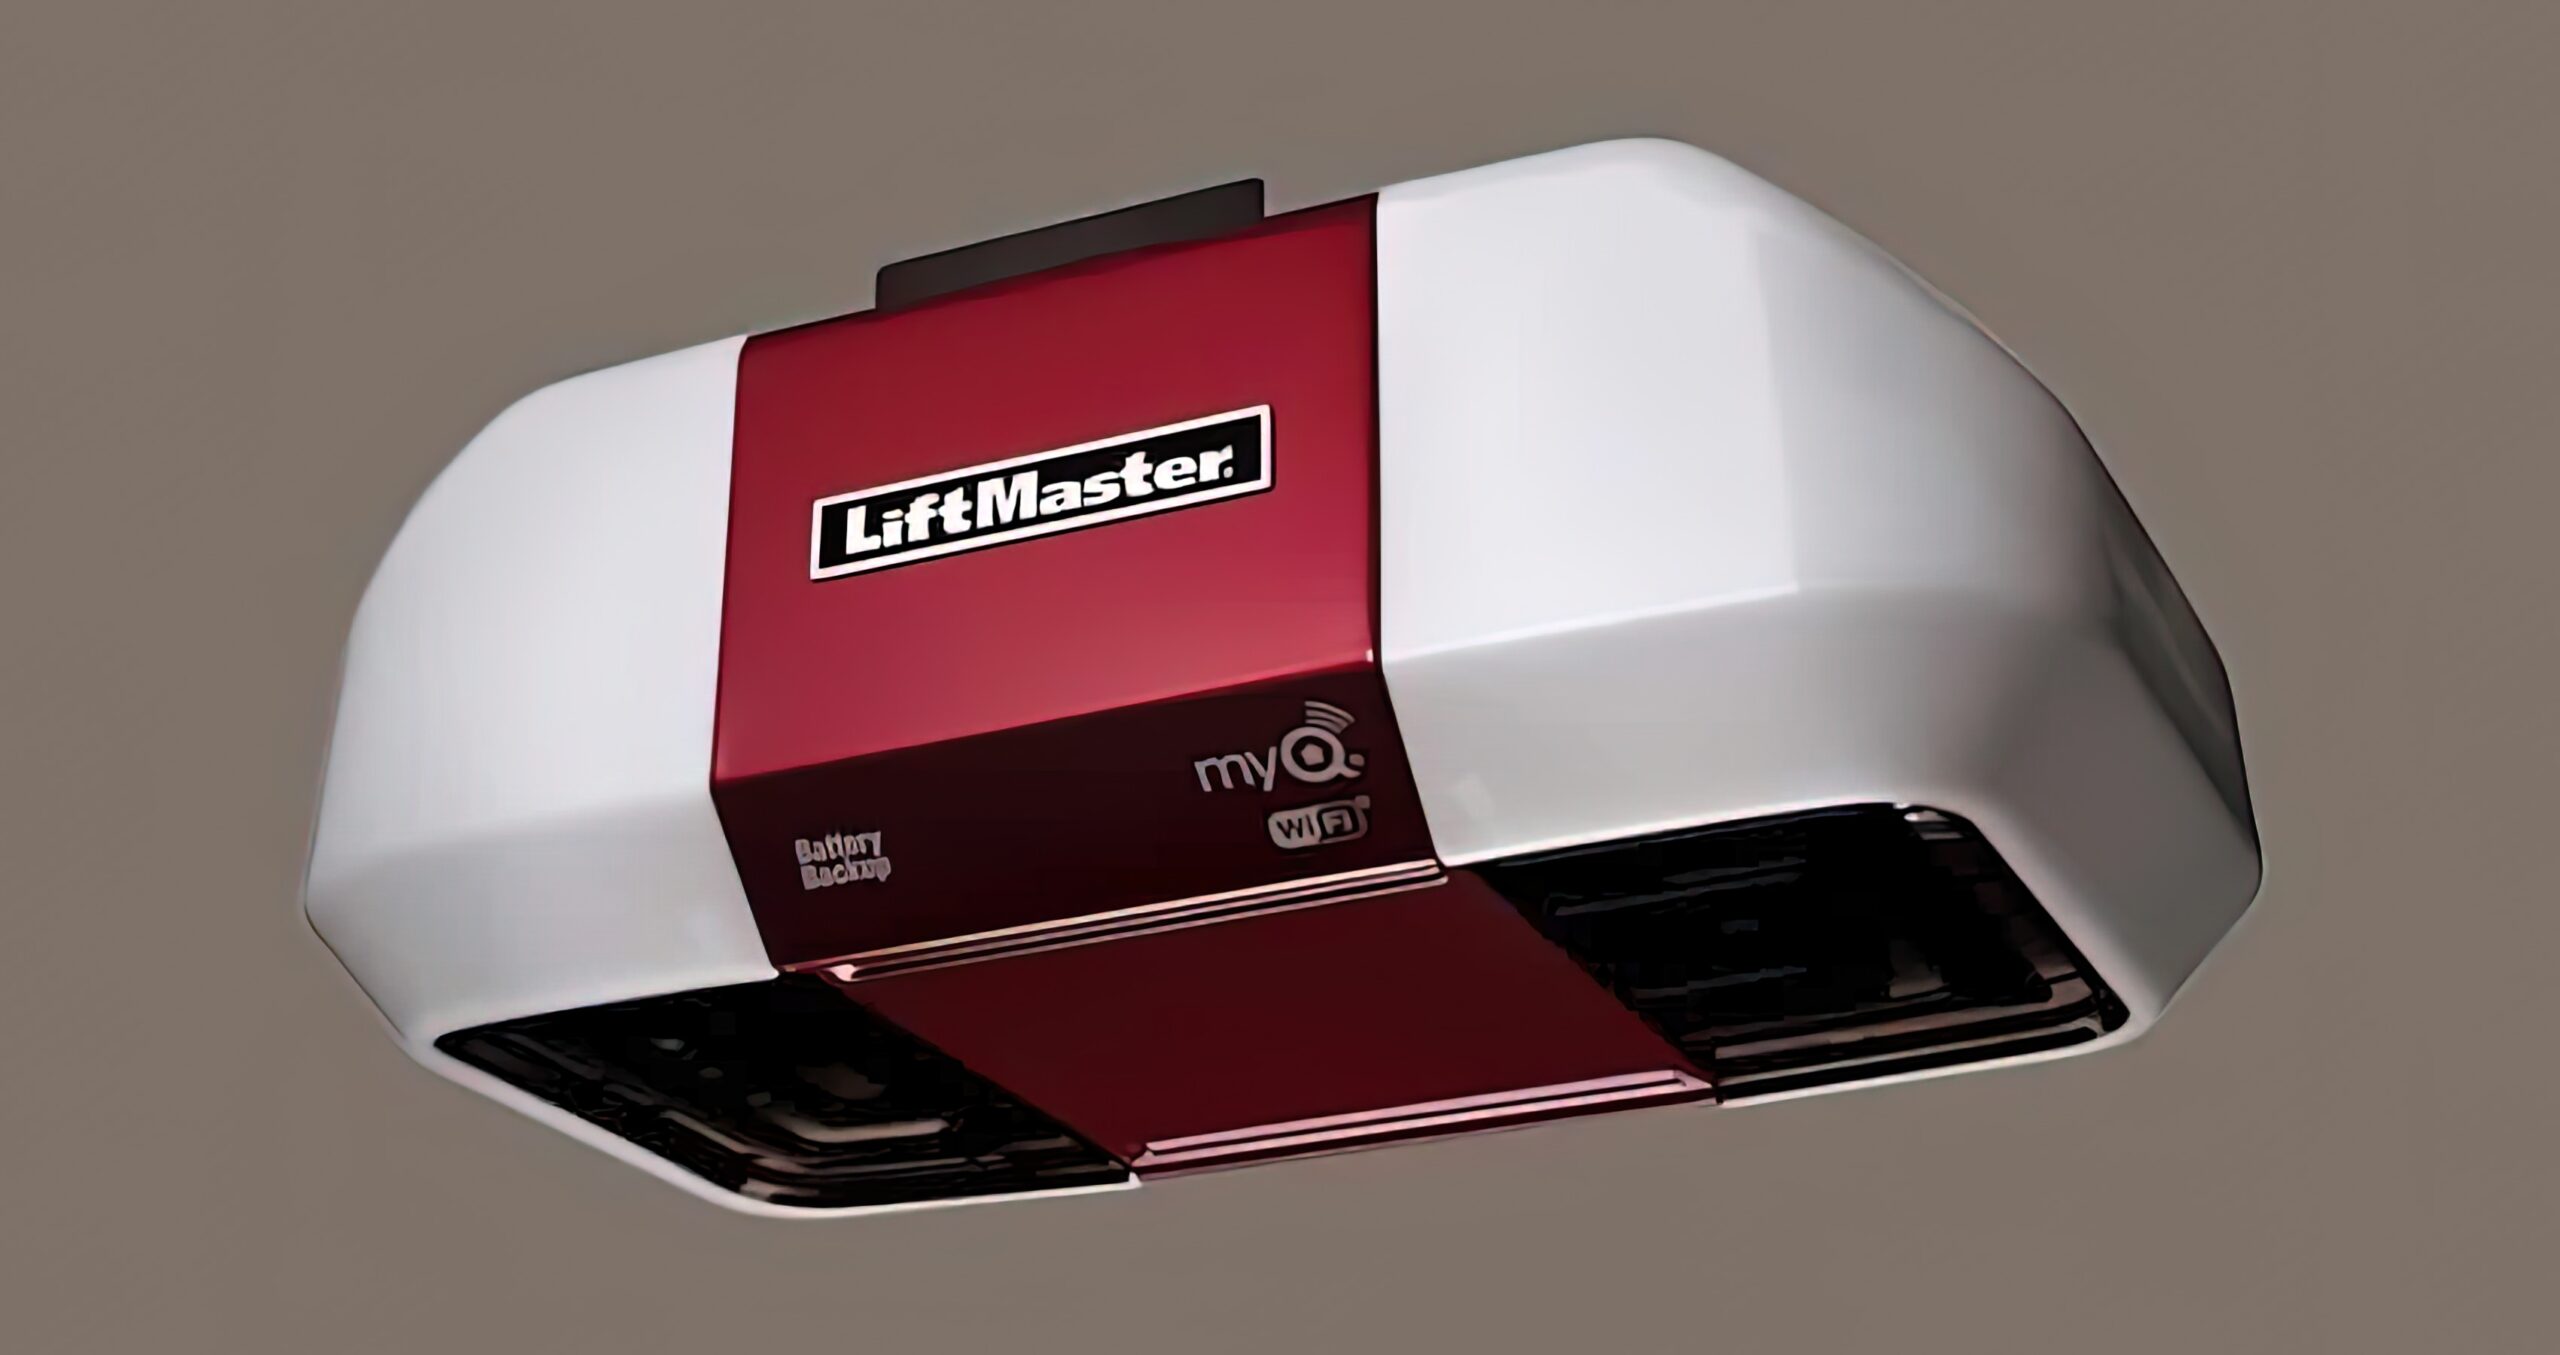 Red Liftmaster garage door opener with white light covers.